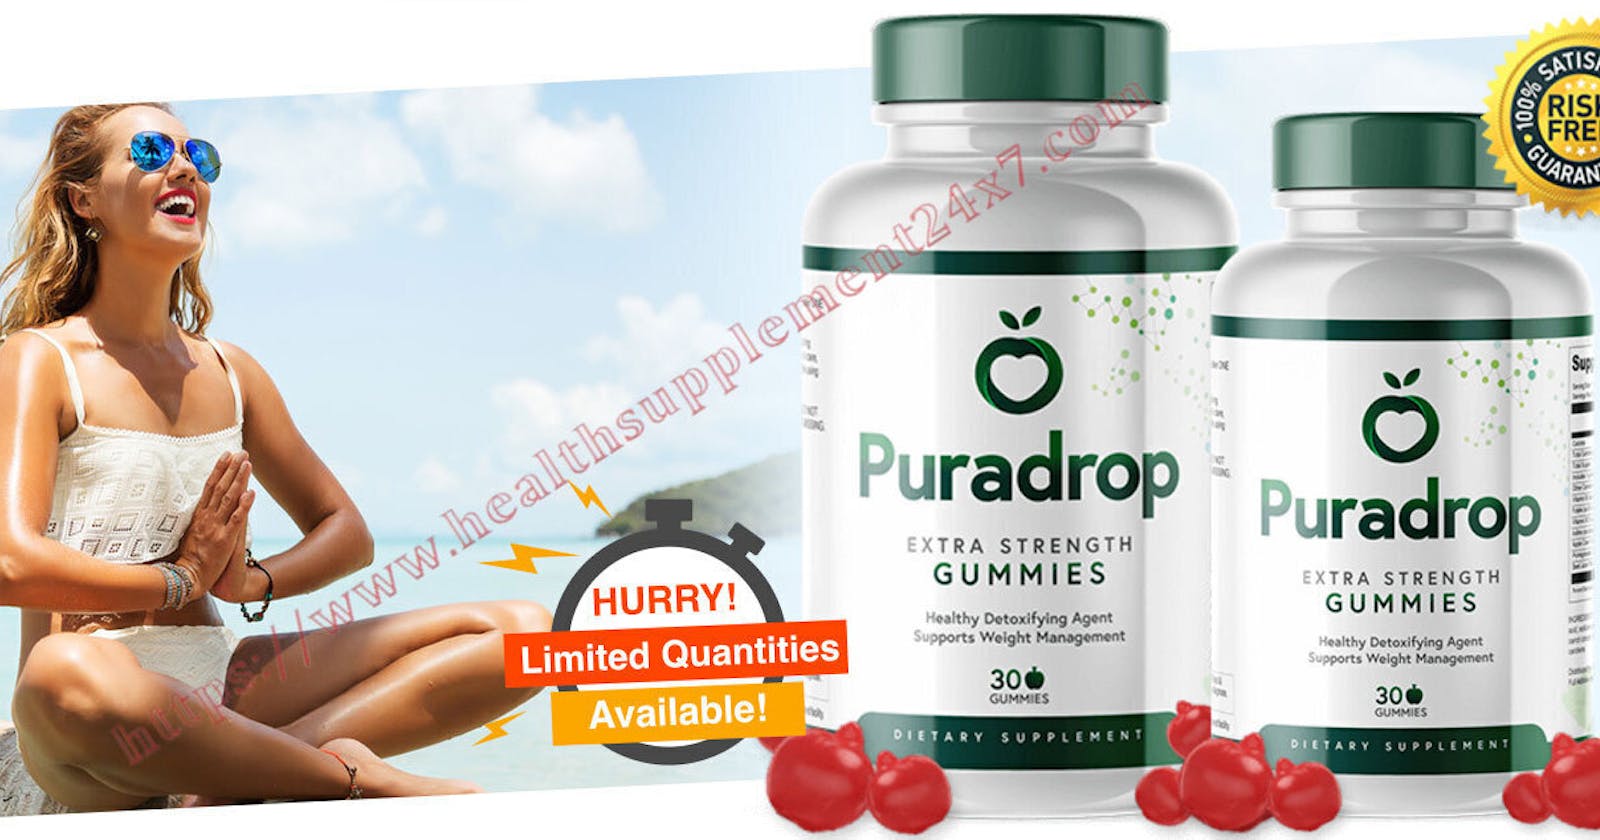 Puradrop Gummies #1 Formula To Support Metabolism, Fat Burn & Weight Loss [Order Now And Save 60%](Spam Or Legit)